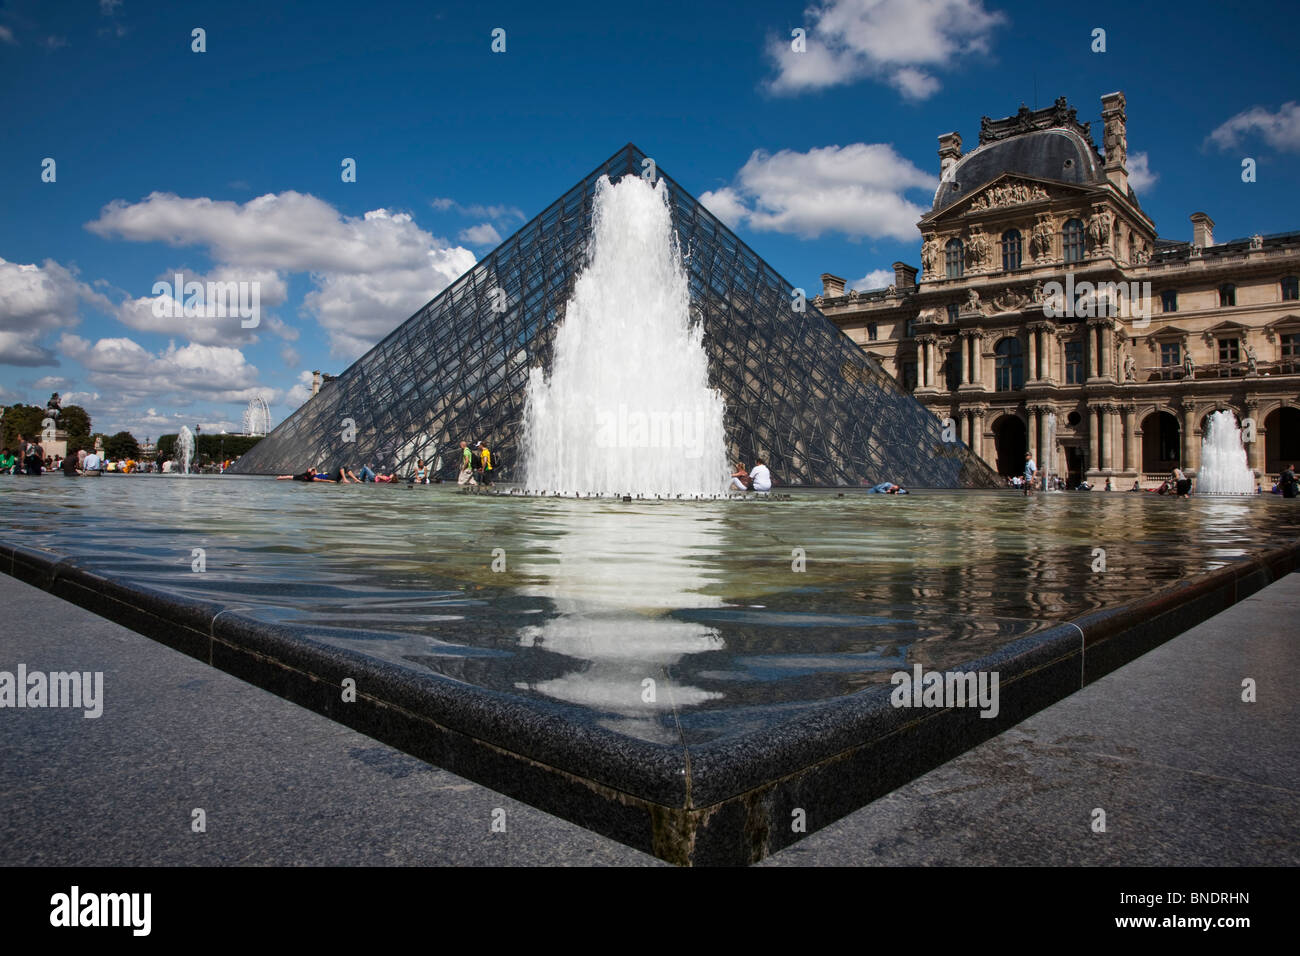 Low wide angle perspective of Fountain, Glass Pyramid, buildings at world famous Louvre museum in Paris France under blue sky and puffy clouds Stock Photo